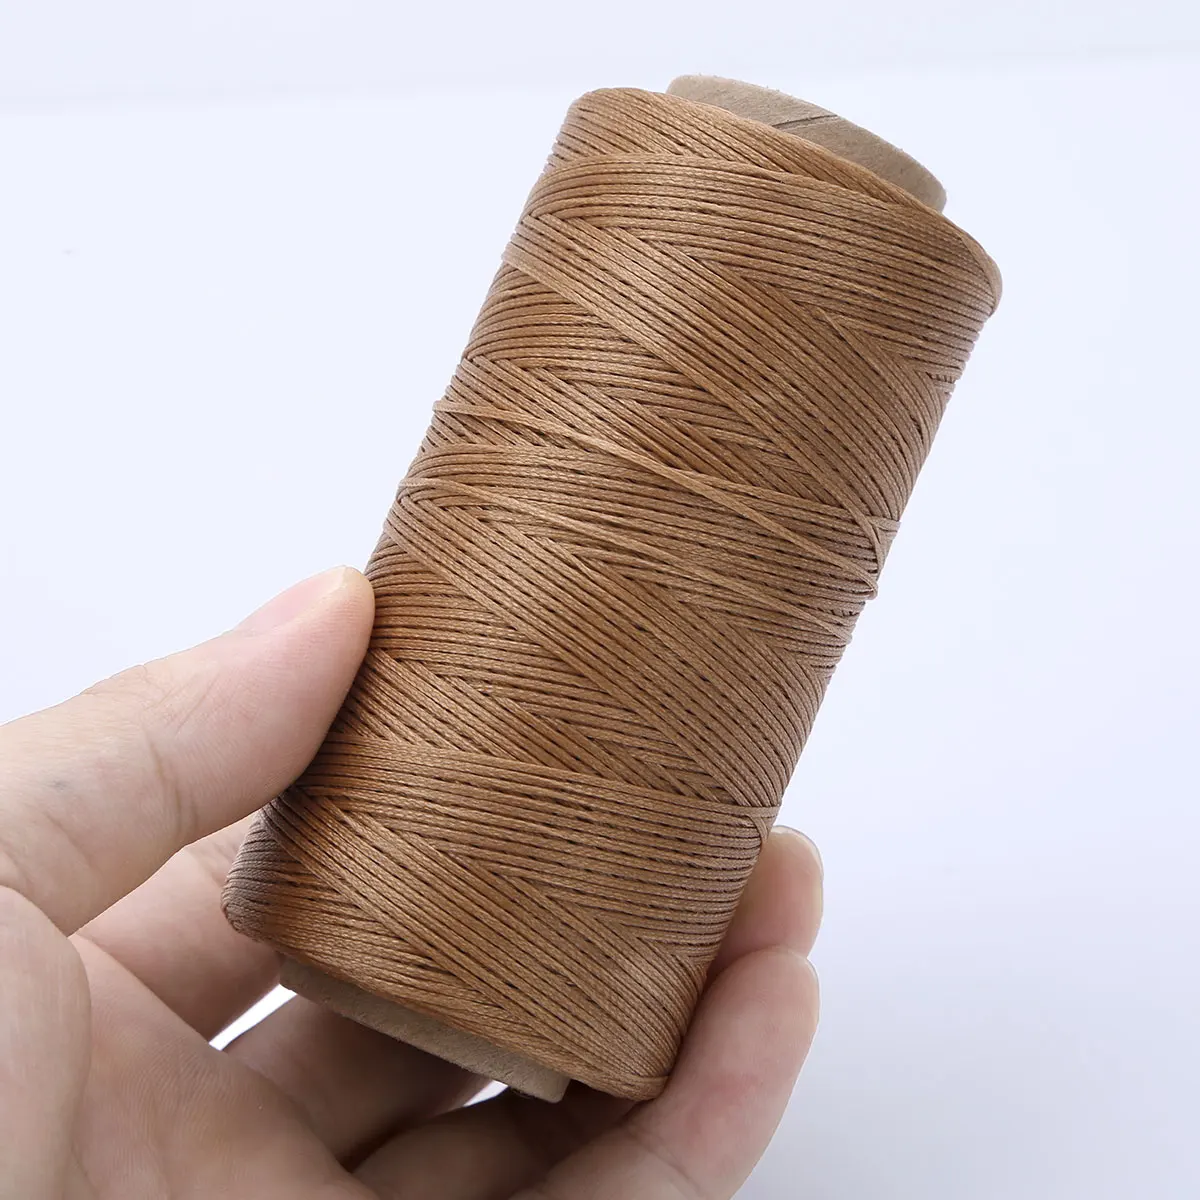 Flat Waxed Thread (Dark Brown) - 284Yard 1mm 150D Wax String Cord Sewing  Craft Tool Portable for DIY Handicraft Leather Products Beading Hand  Stitching 